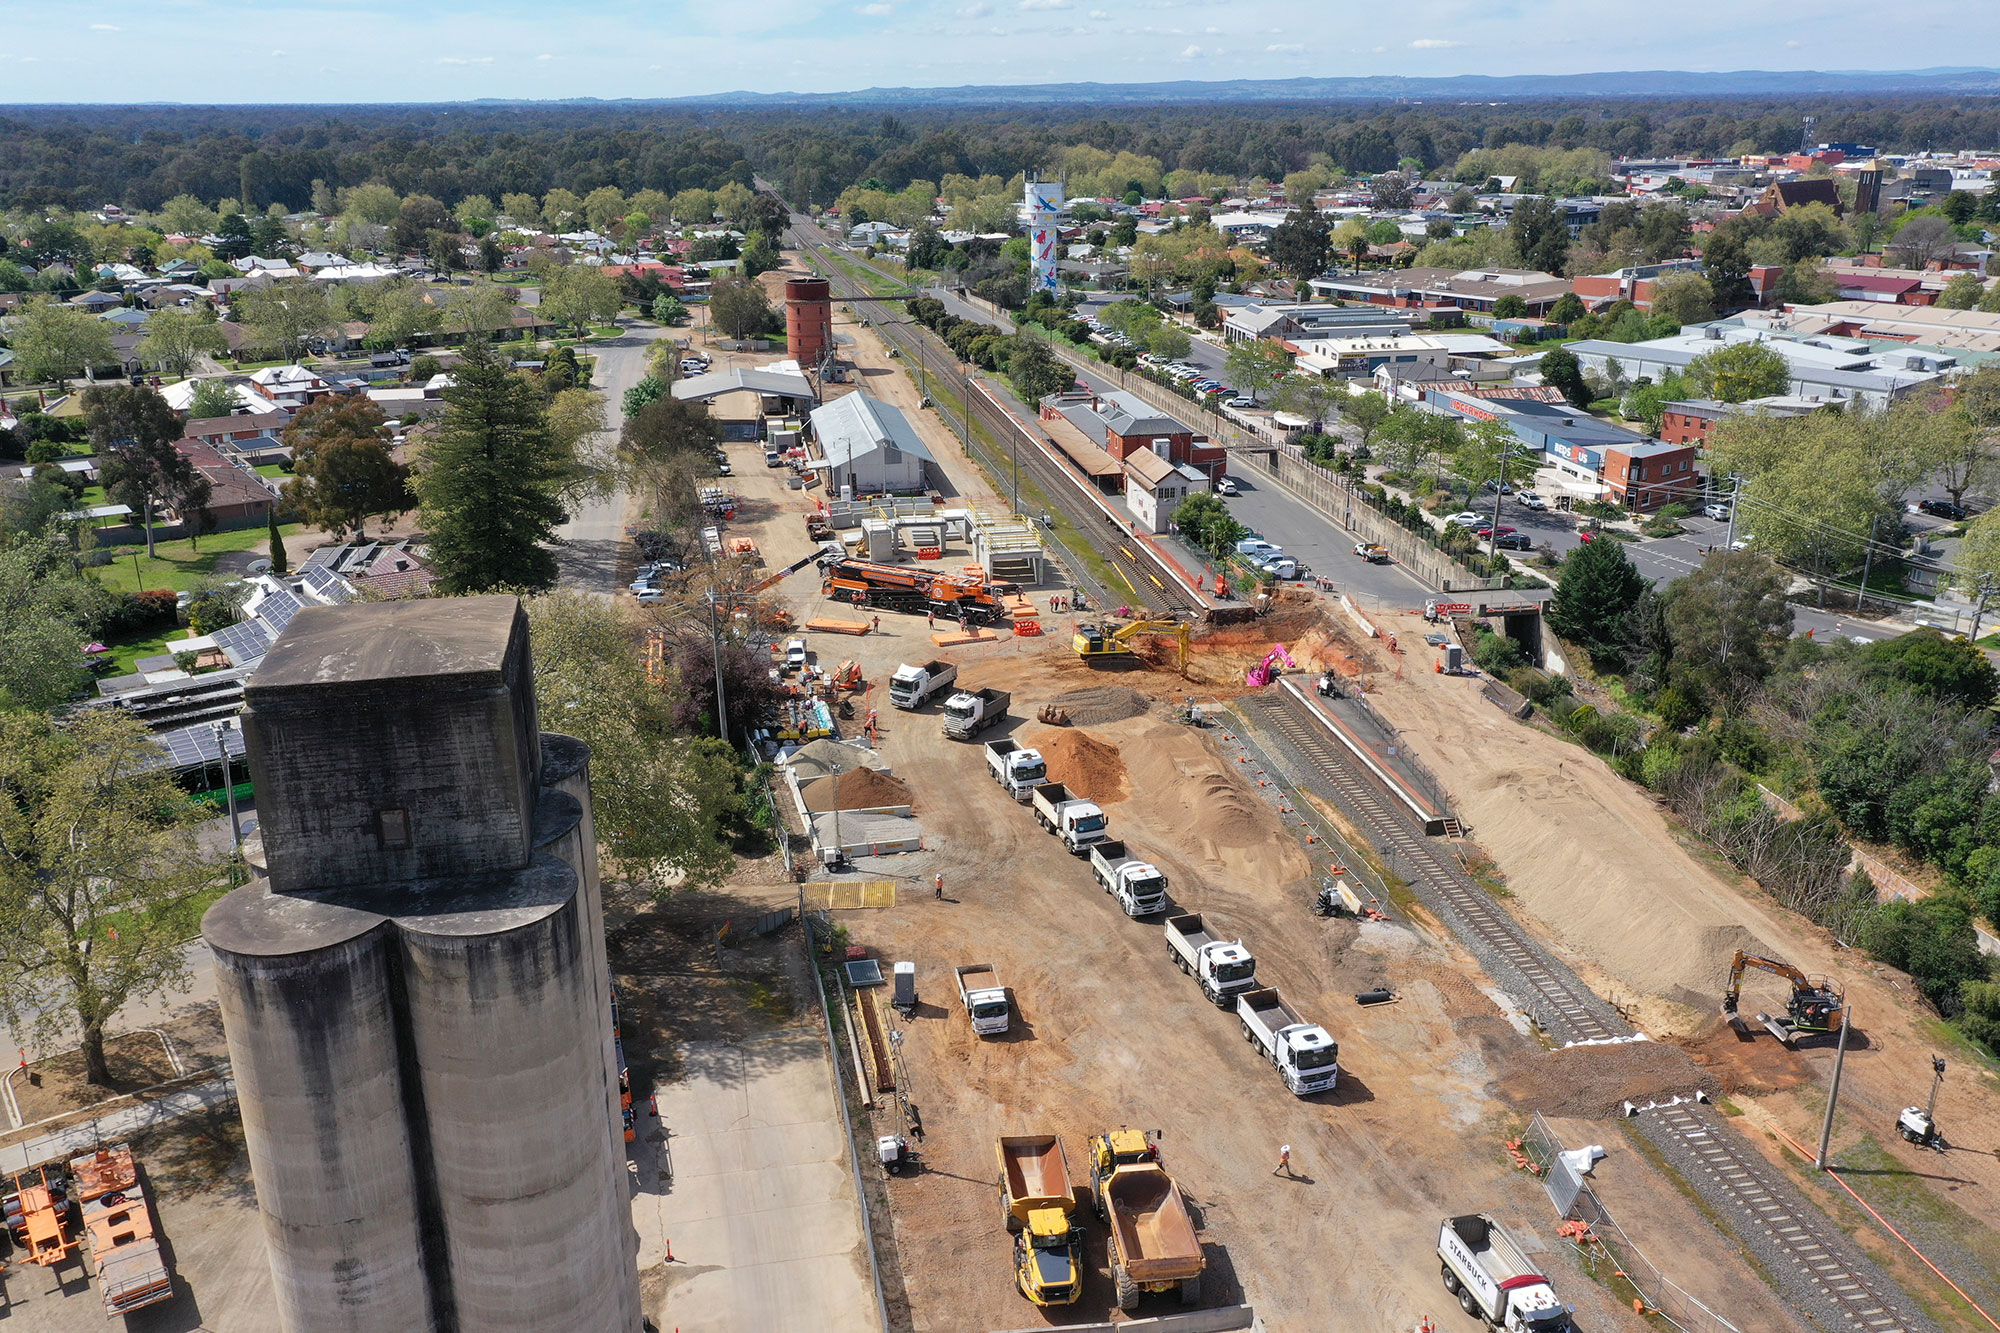 Trucks lined up to remove the soil during the installation of the underpass in Wangaratta